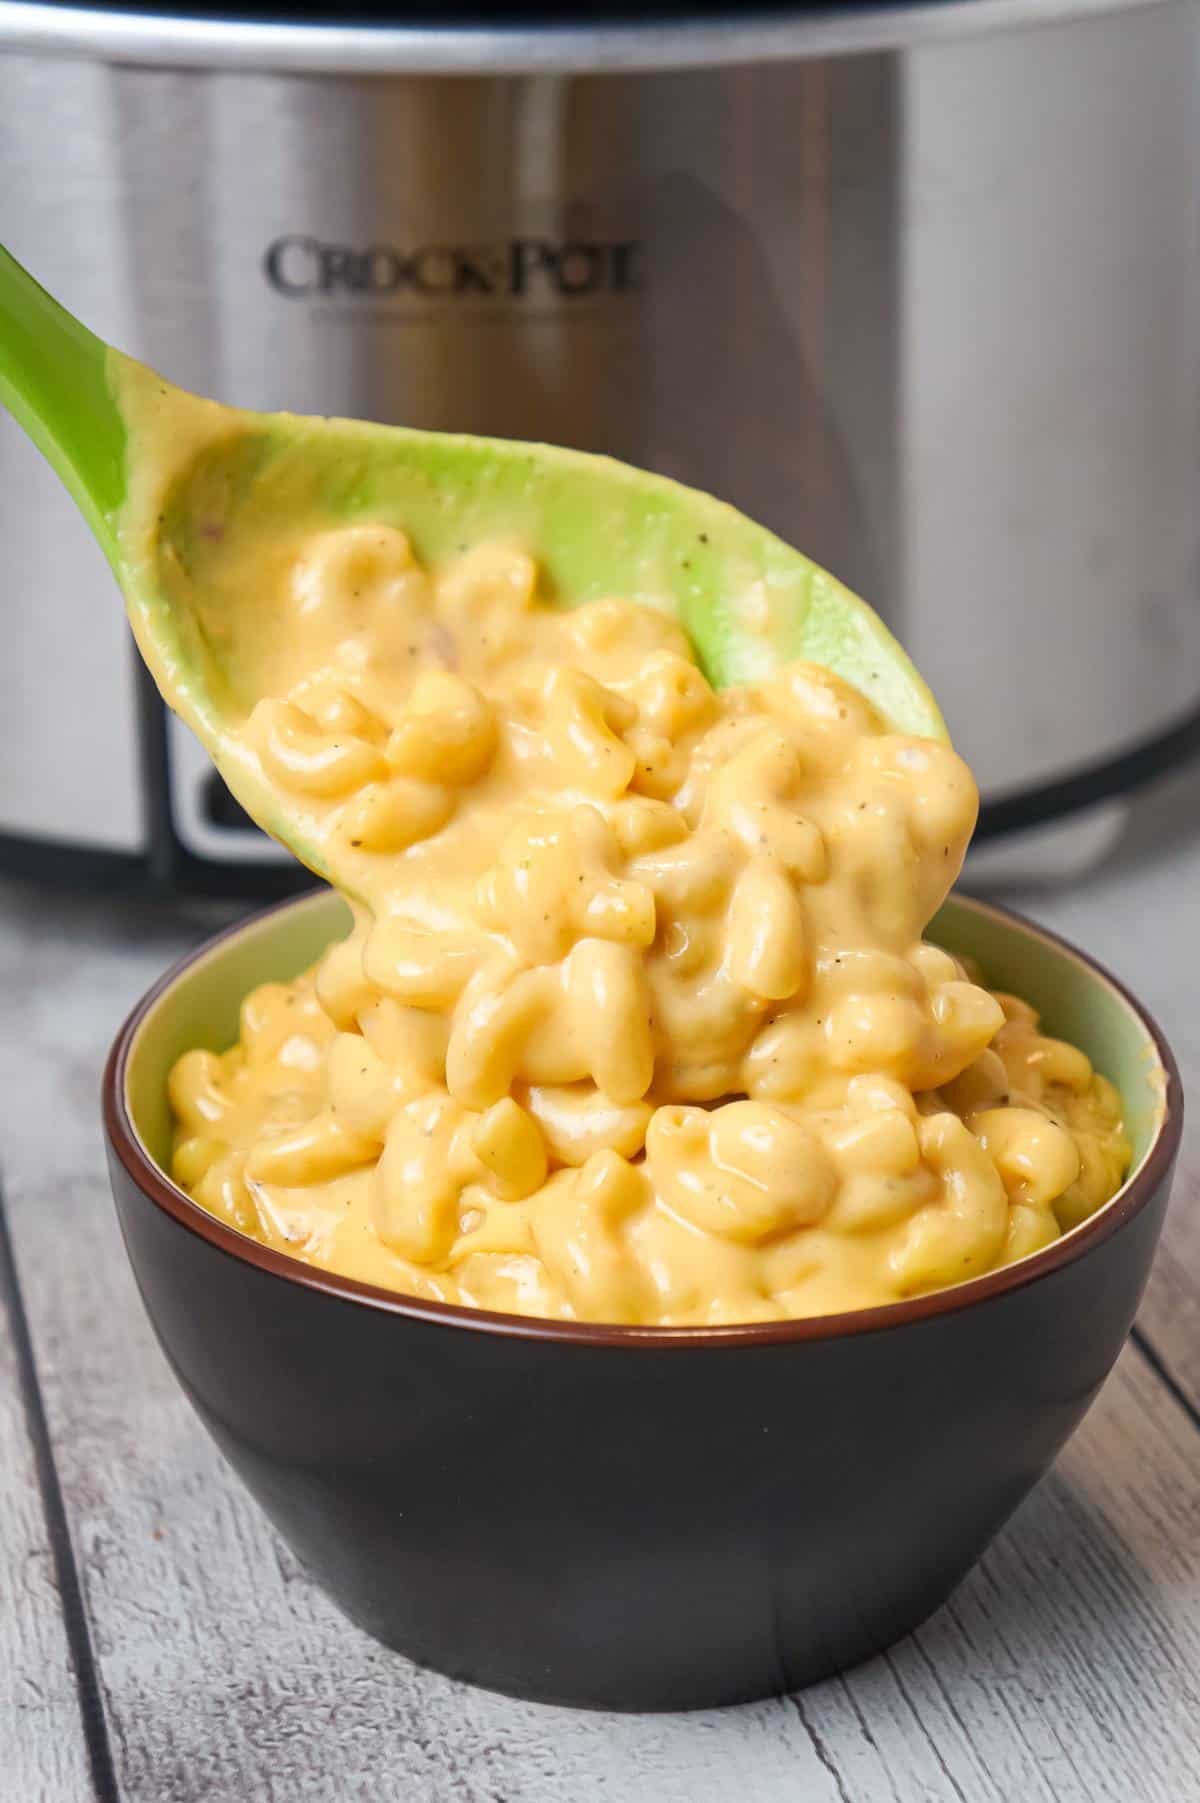 Crock Pot Mac and Cheese is an easy macaroni and cheese recipe made with condensed cheddar cheese soup, heavy cream and shredded mozzarella and cheddar cheese.